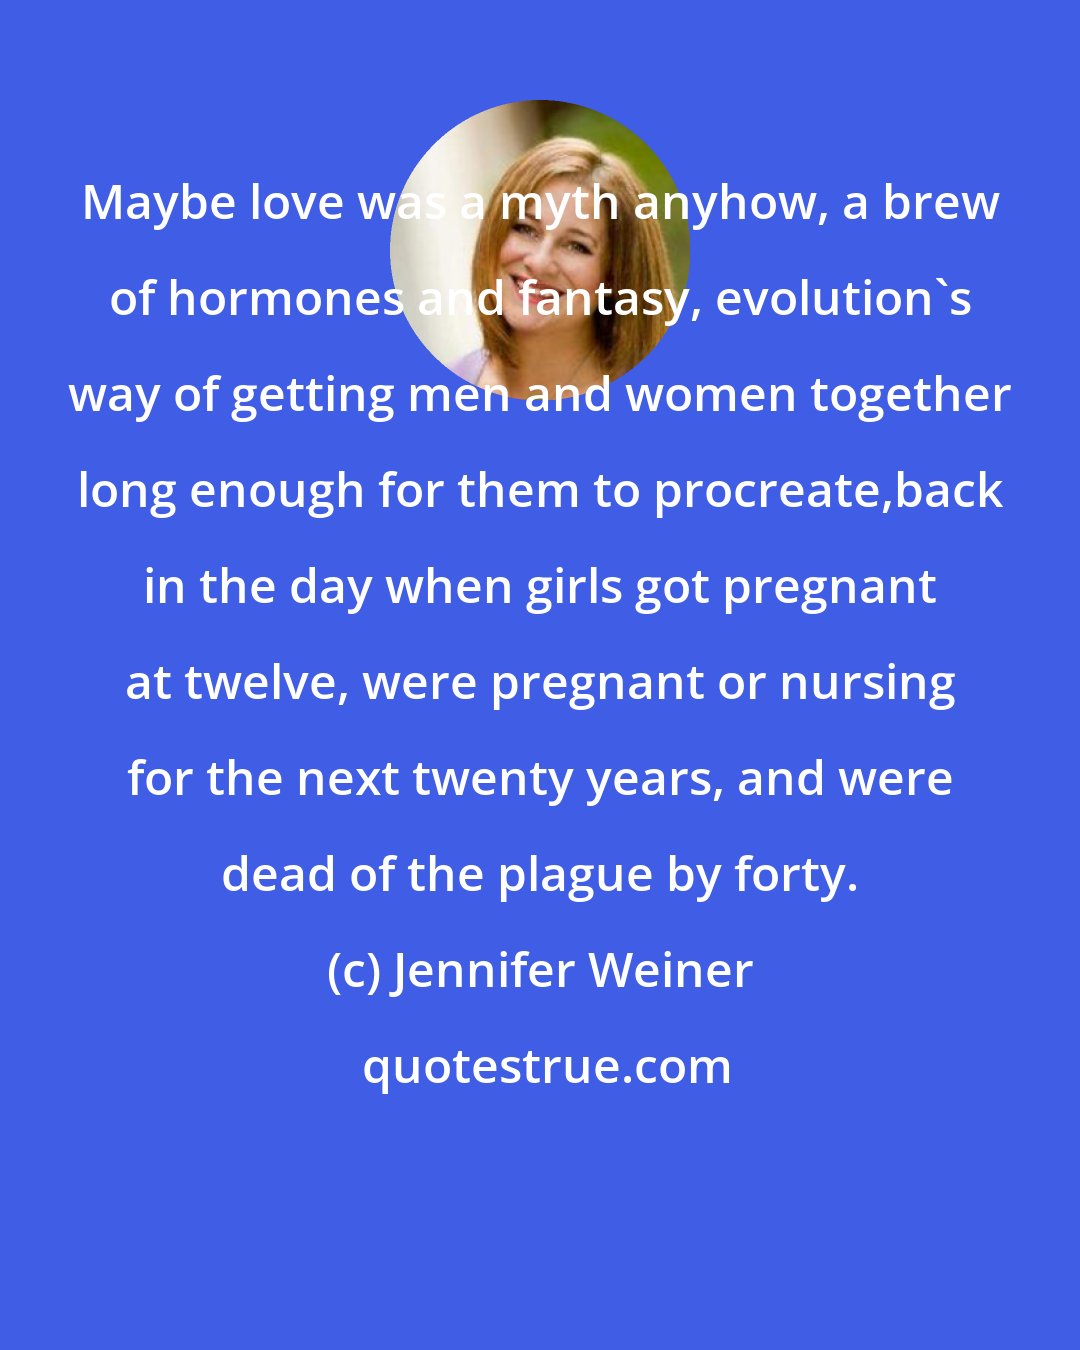 Jennifer Weiner: Maybe love was a myth anyhow, a brew of hormones and fantasy, evolution's way of getting men and women together long enough for them to procreate,back in the day when girls got pregnant at twelve, were pregnant or nursing for the next twenty years, and were dead of the plague by forty.